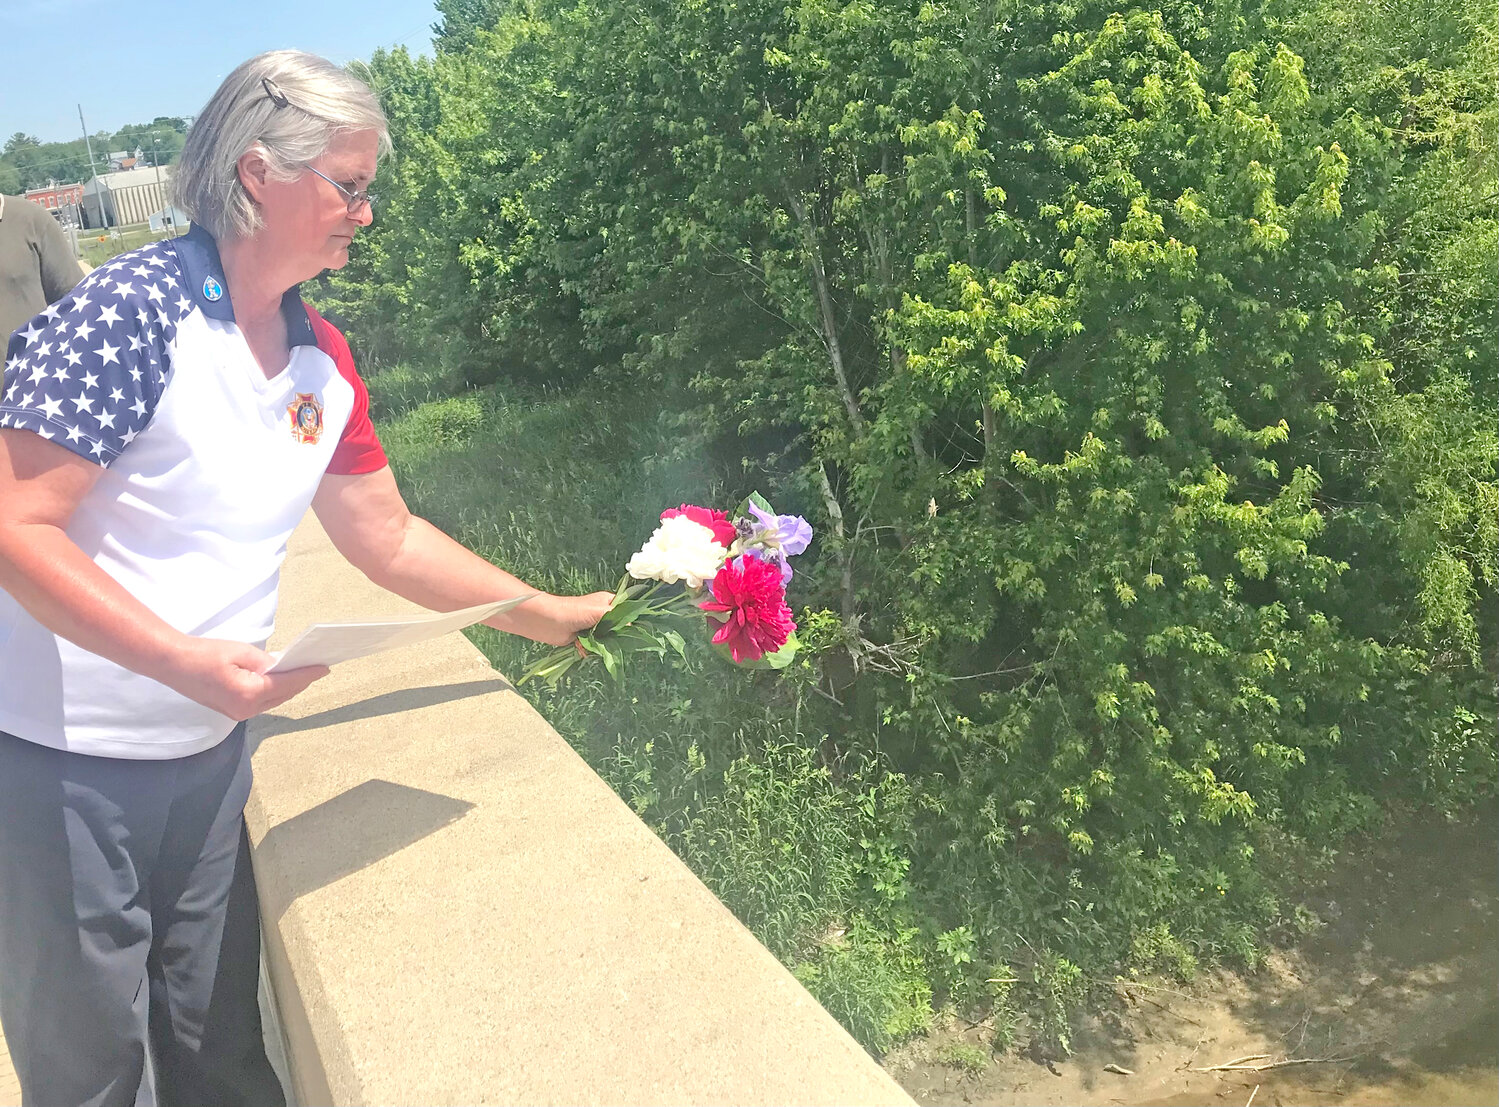 Kathy Colbert, who gave the prayer at the Riverside Memorial Day service, throws flowers from the bridge to honor those lost at sea.